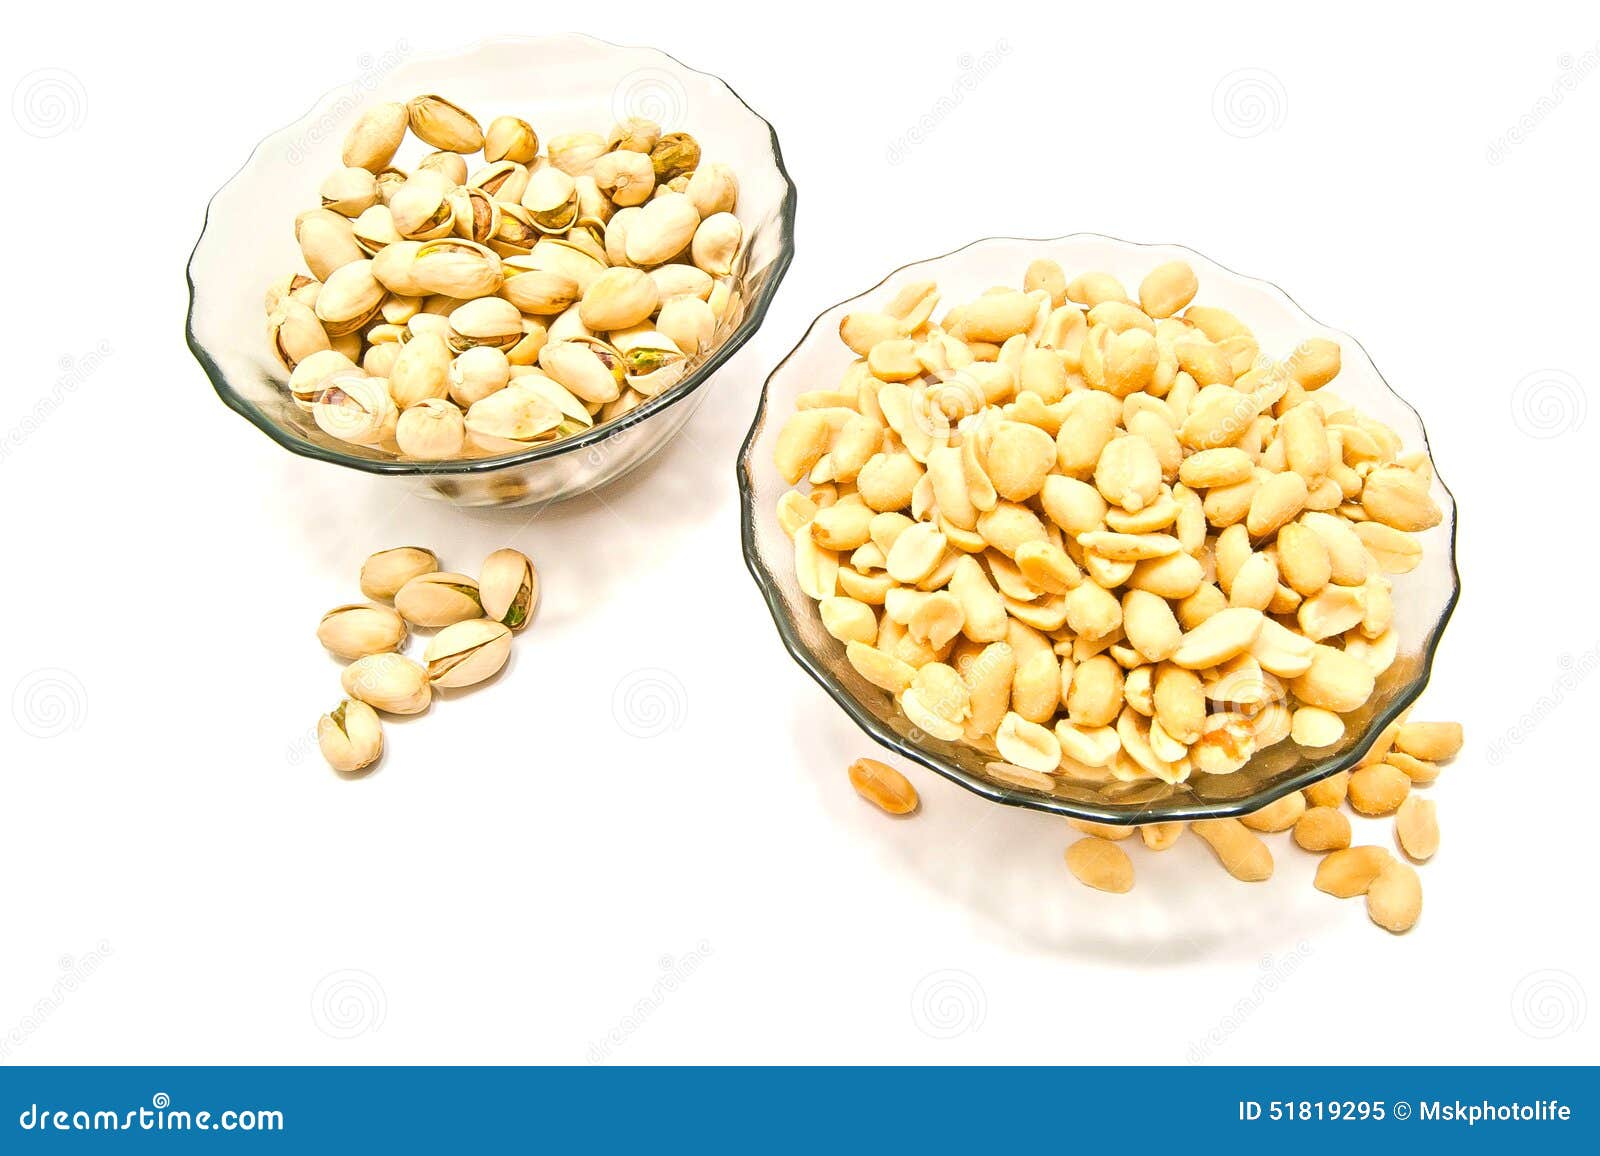 two plate with many different nuts